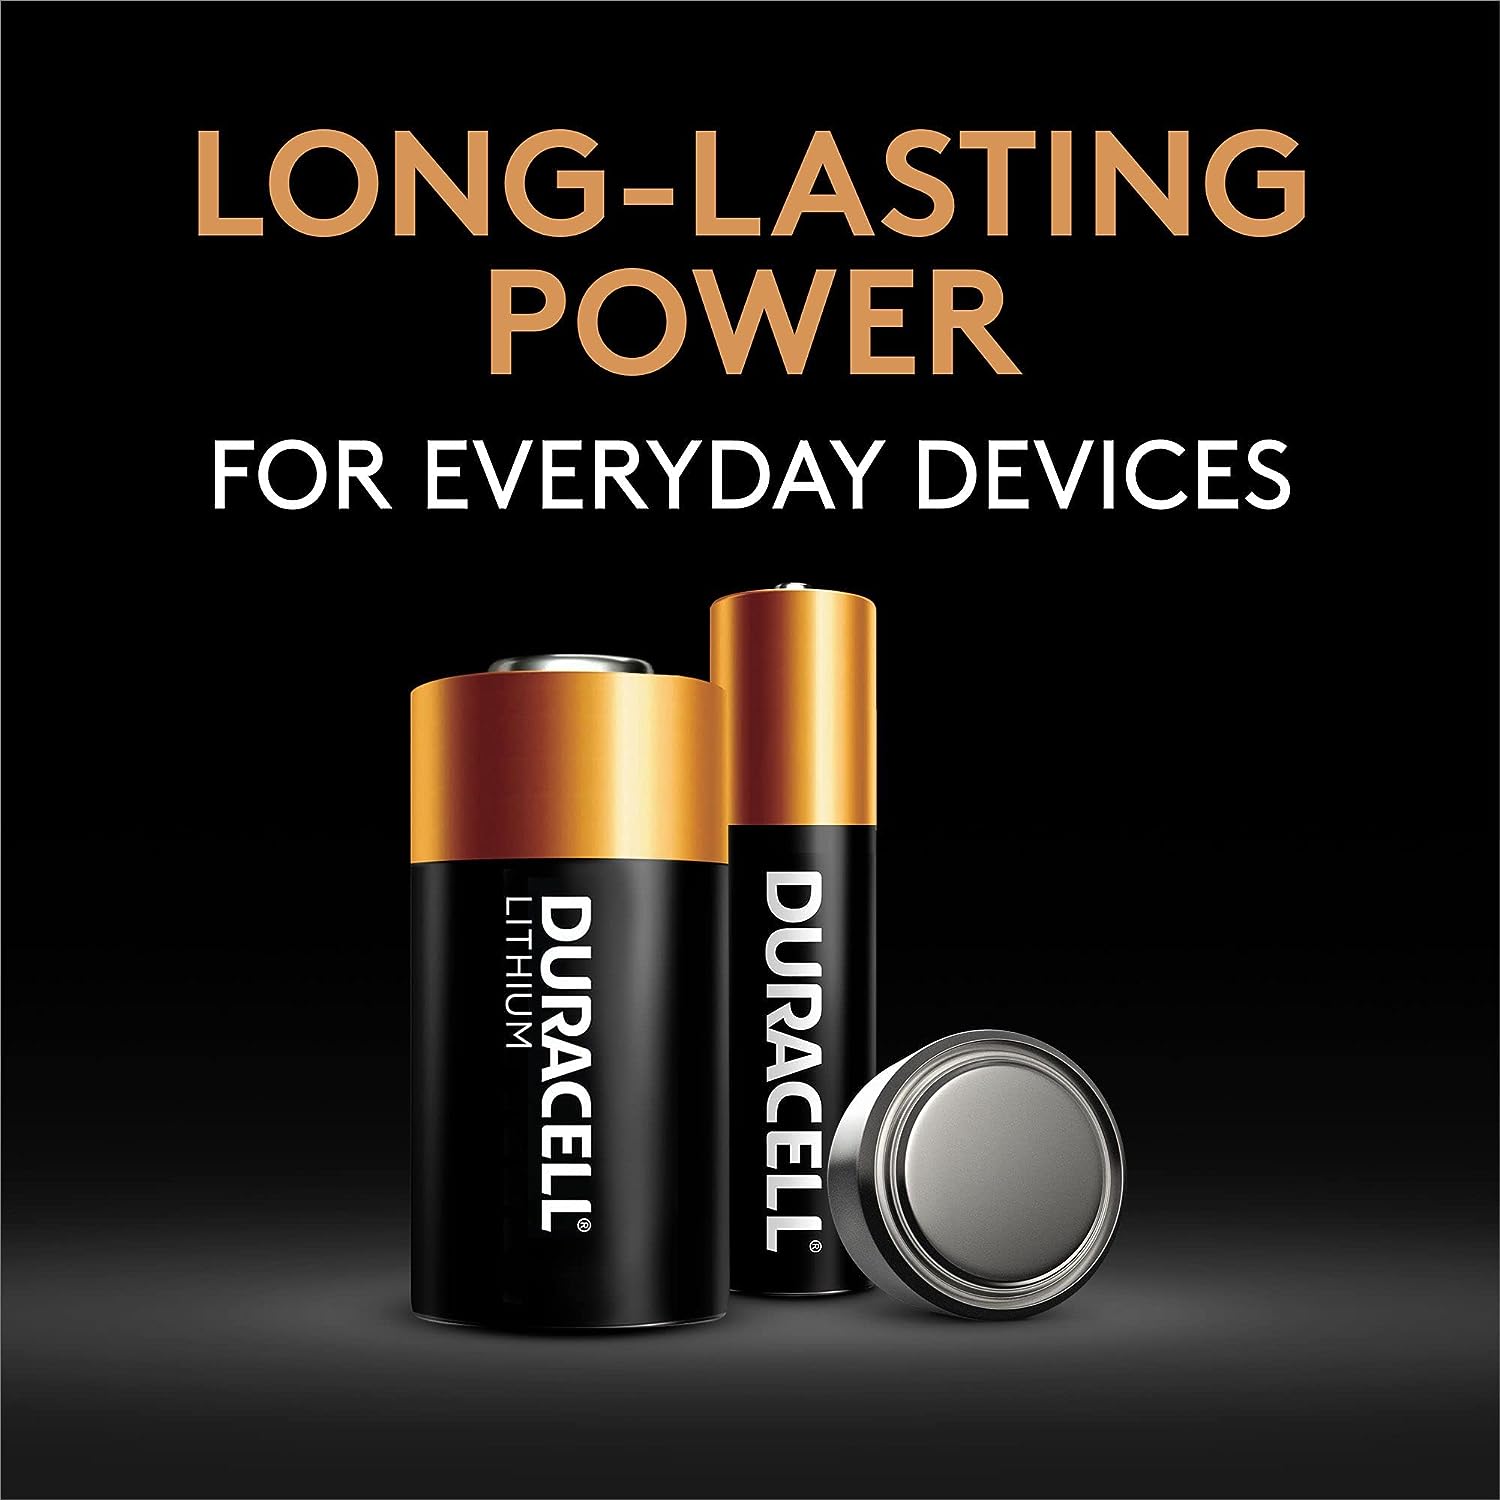 Duracell CR123A 3V Lithium Battery: The Powerhouse for Home Safety and Security Devices